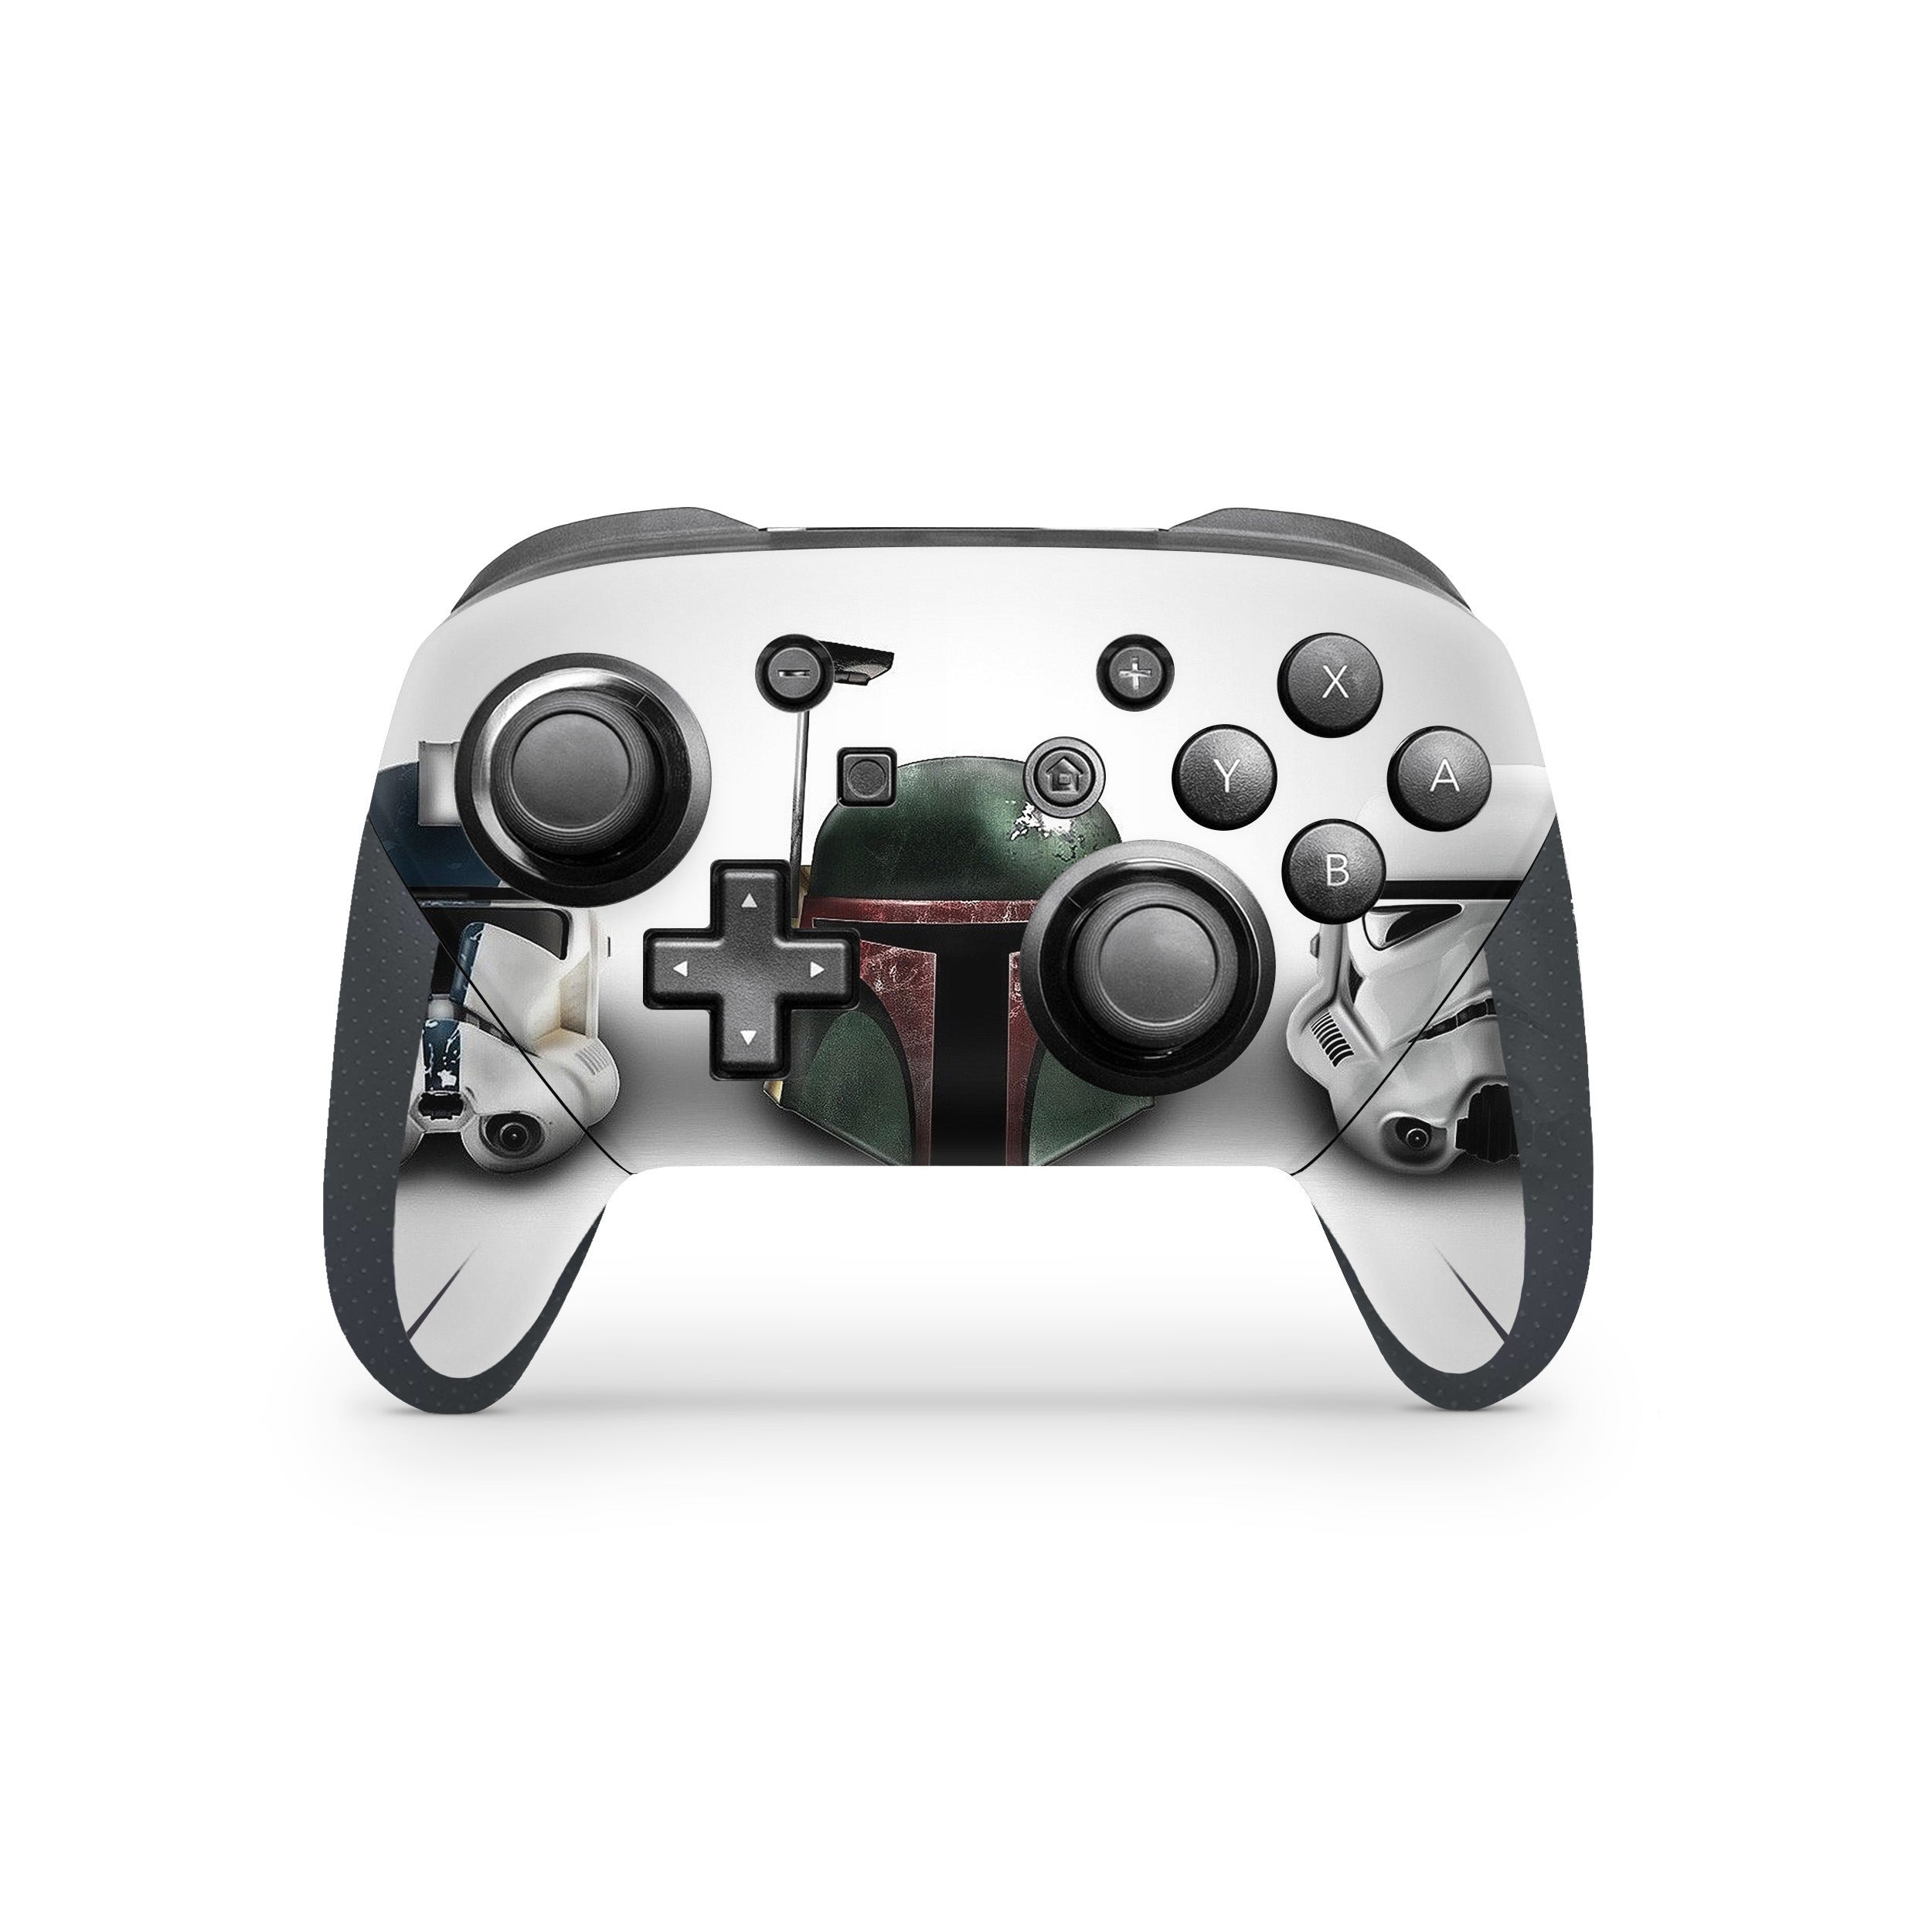 A video game skin featuring a Star Wars design for the Switch Pro Controller.